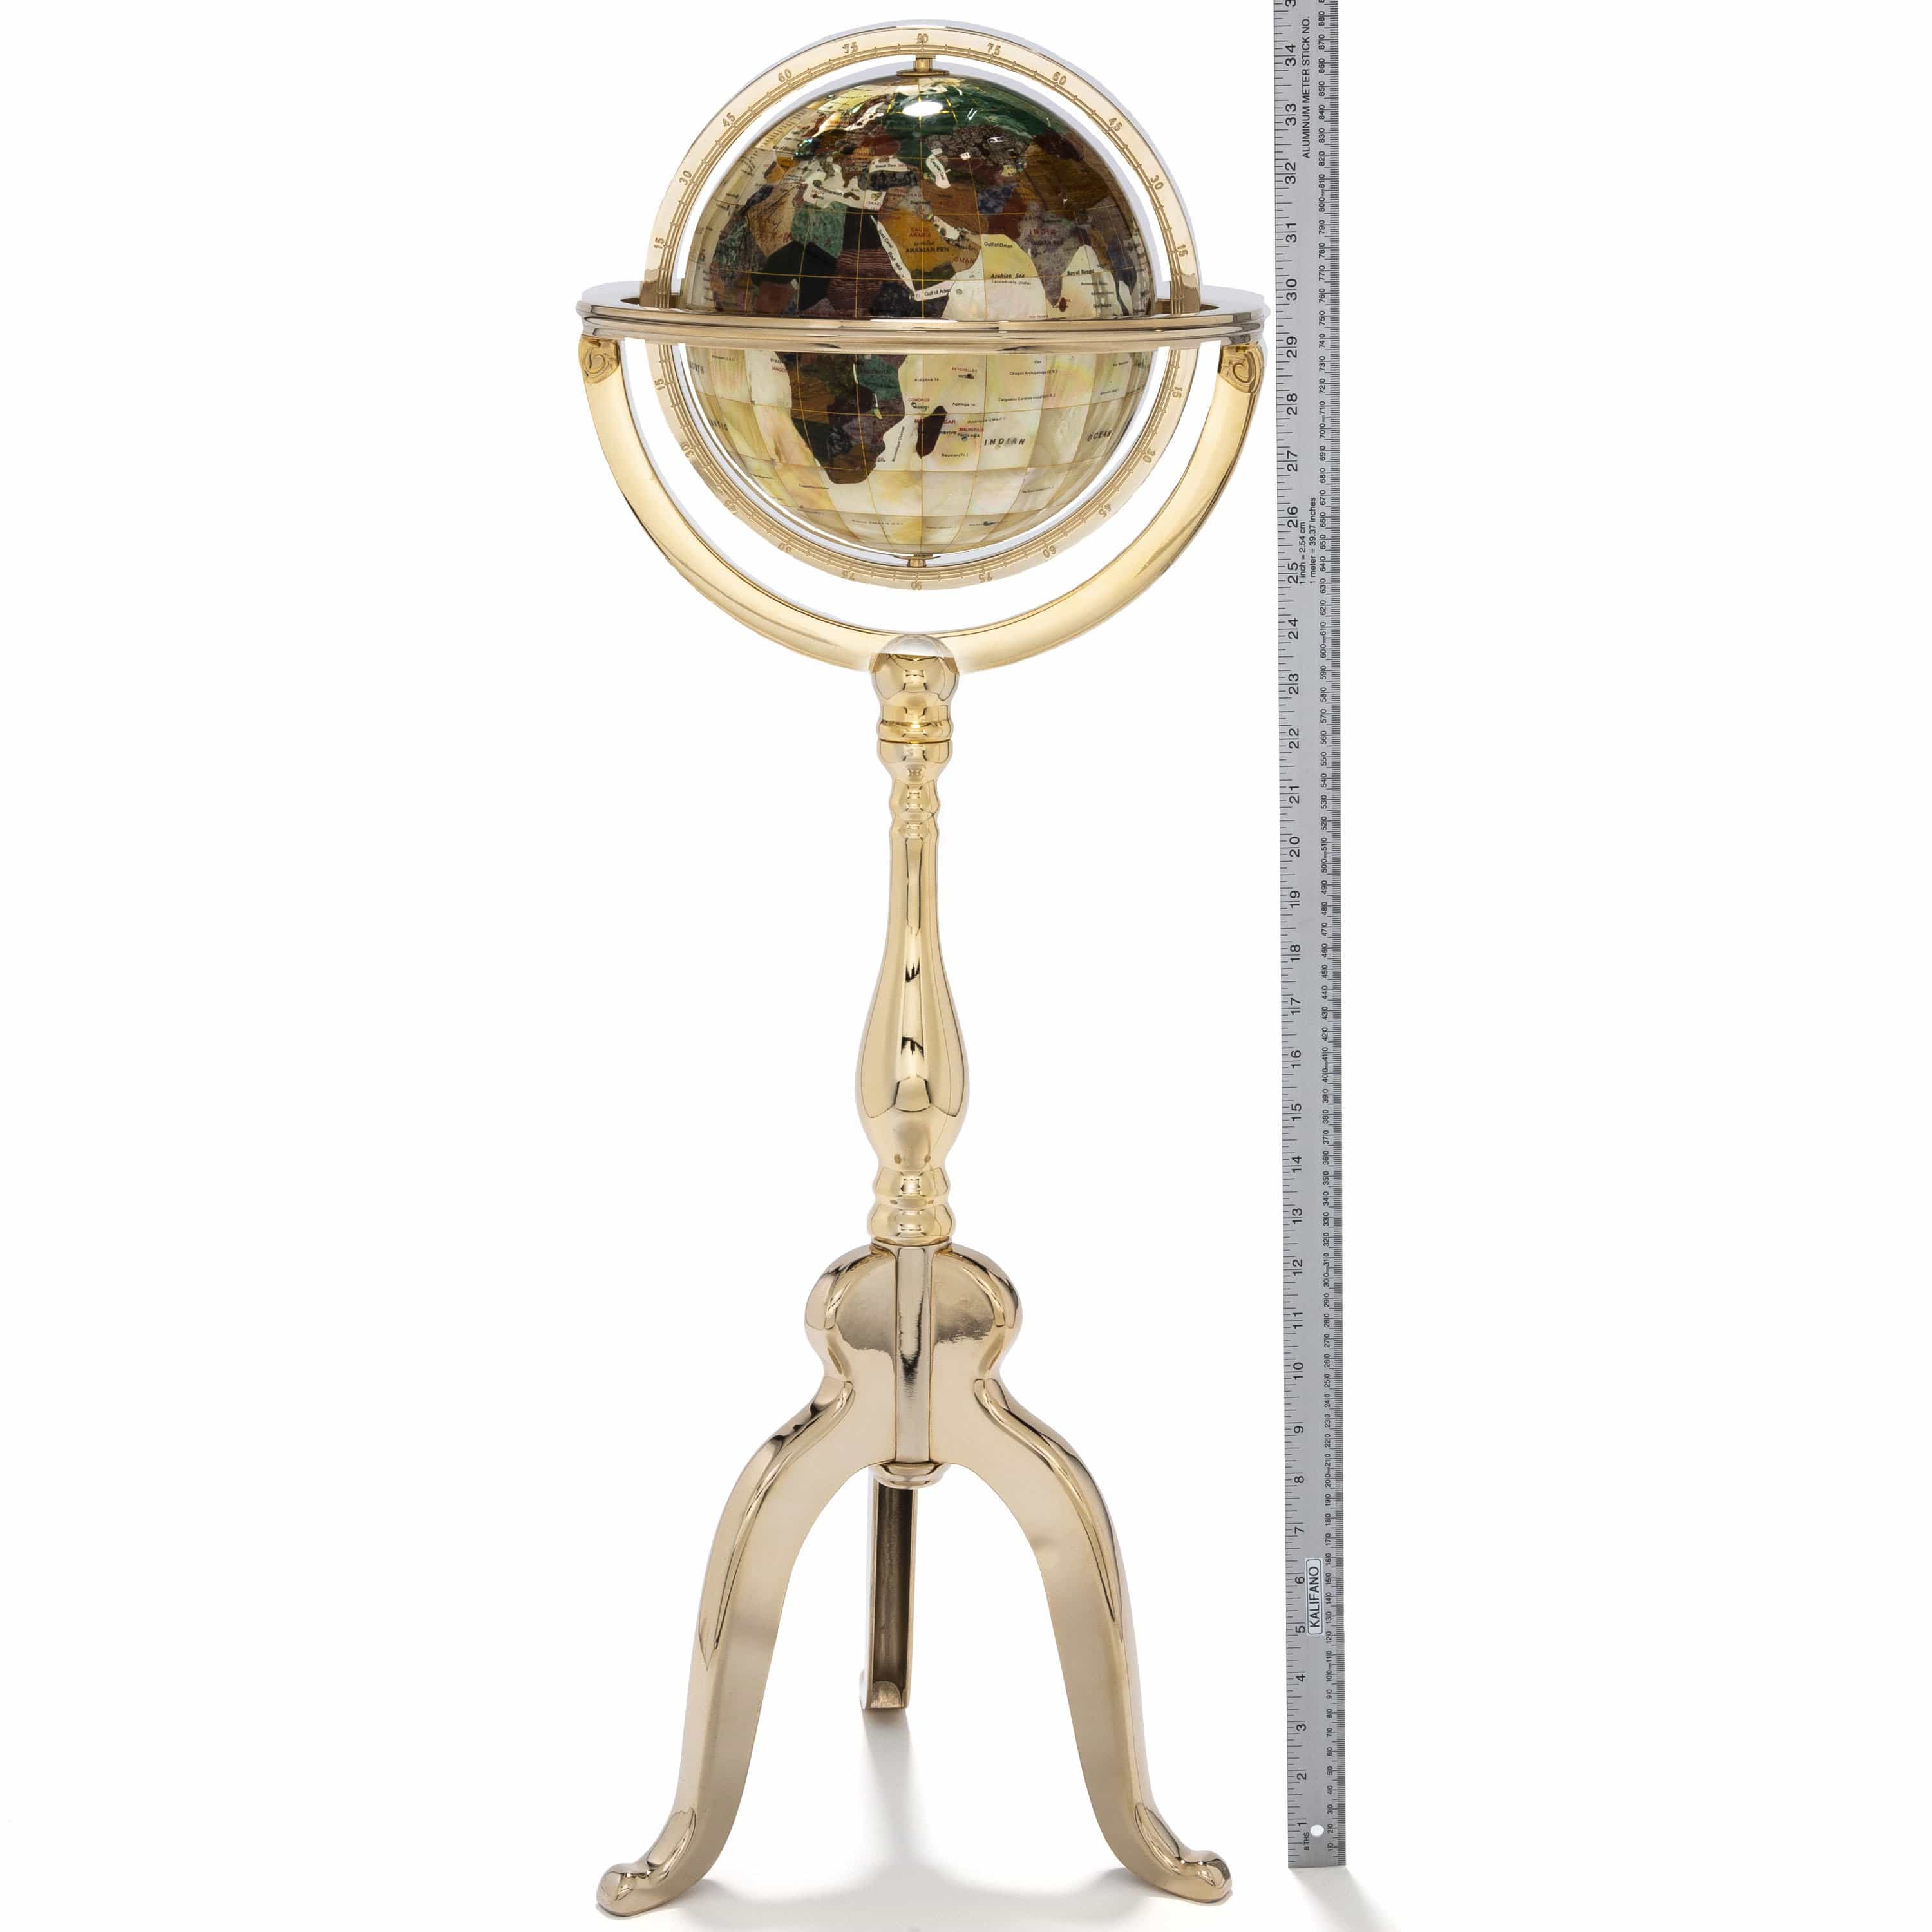 Kalifano Gemstone Globes 9" Gemstone Globe with a Mother of Pearl Full Cut Ocean on a Gold Colored Masterpiece Stand GTS220G-MOP